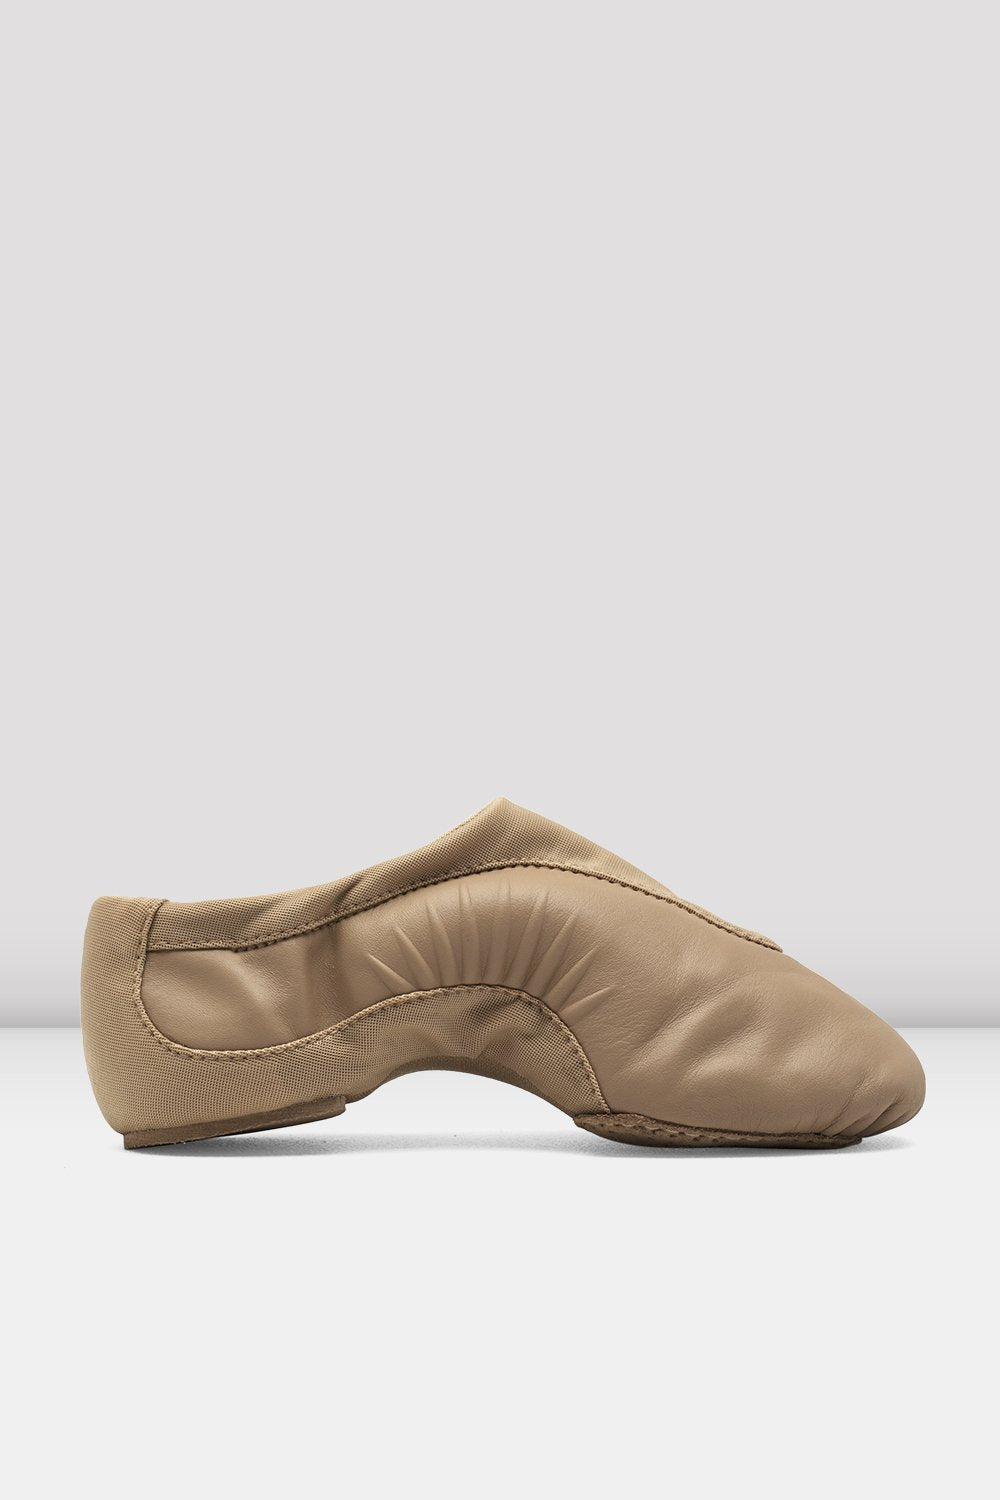 Bloch Ladies Pulse Leather Jazz Shoes